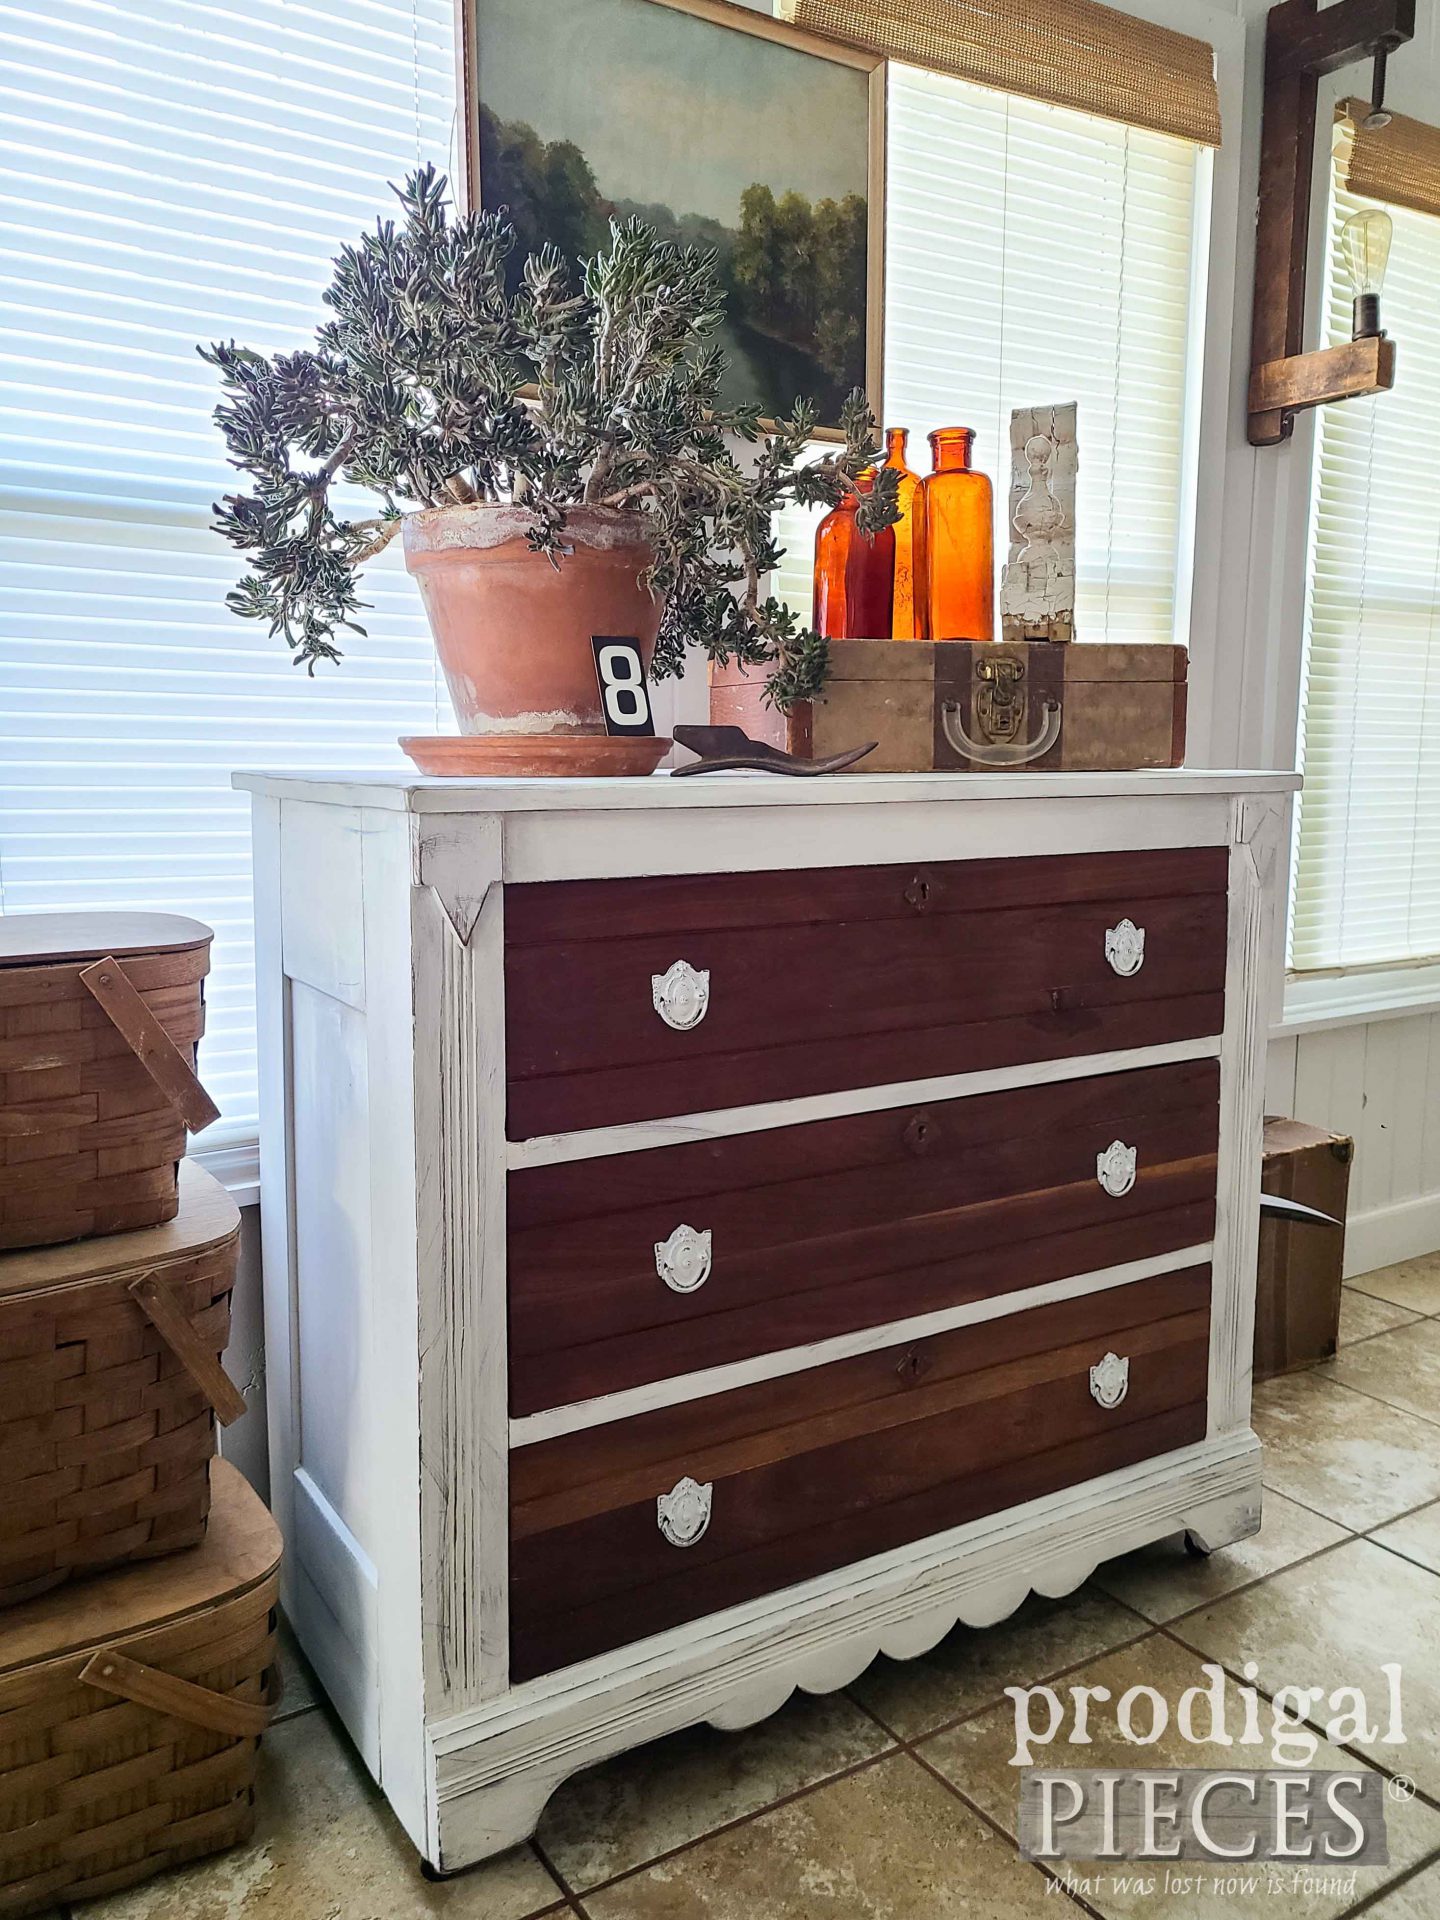 Painted White with Stained Wood Antique Chest of Drawers Renewed by Larissa of Prodigal Pieces | prodigalpieces.com #prodigalpieces #rustic #farmhouse #homedecor